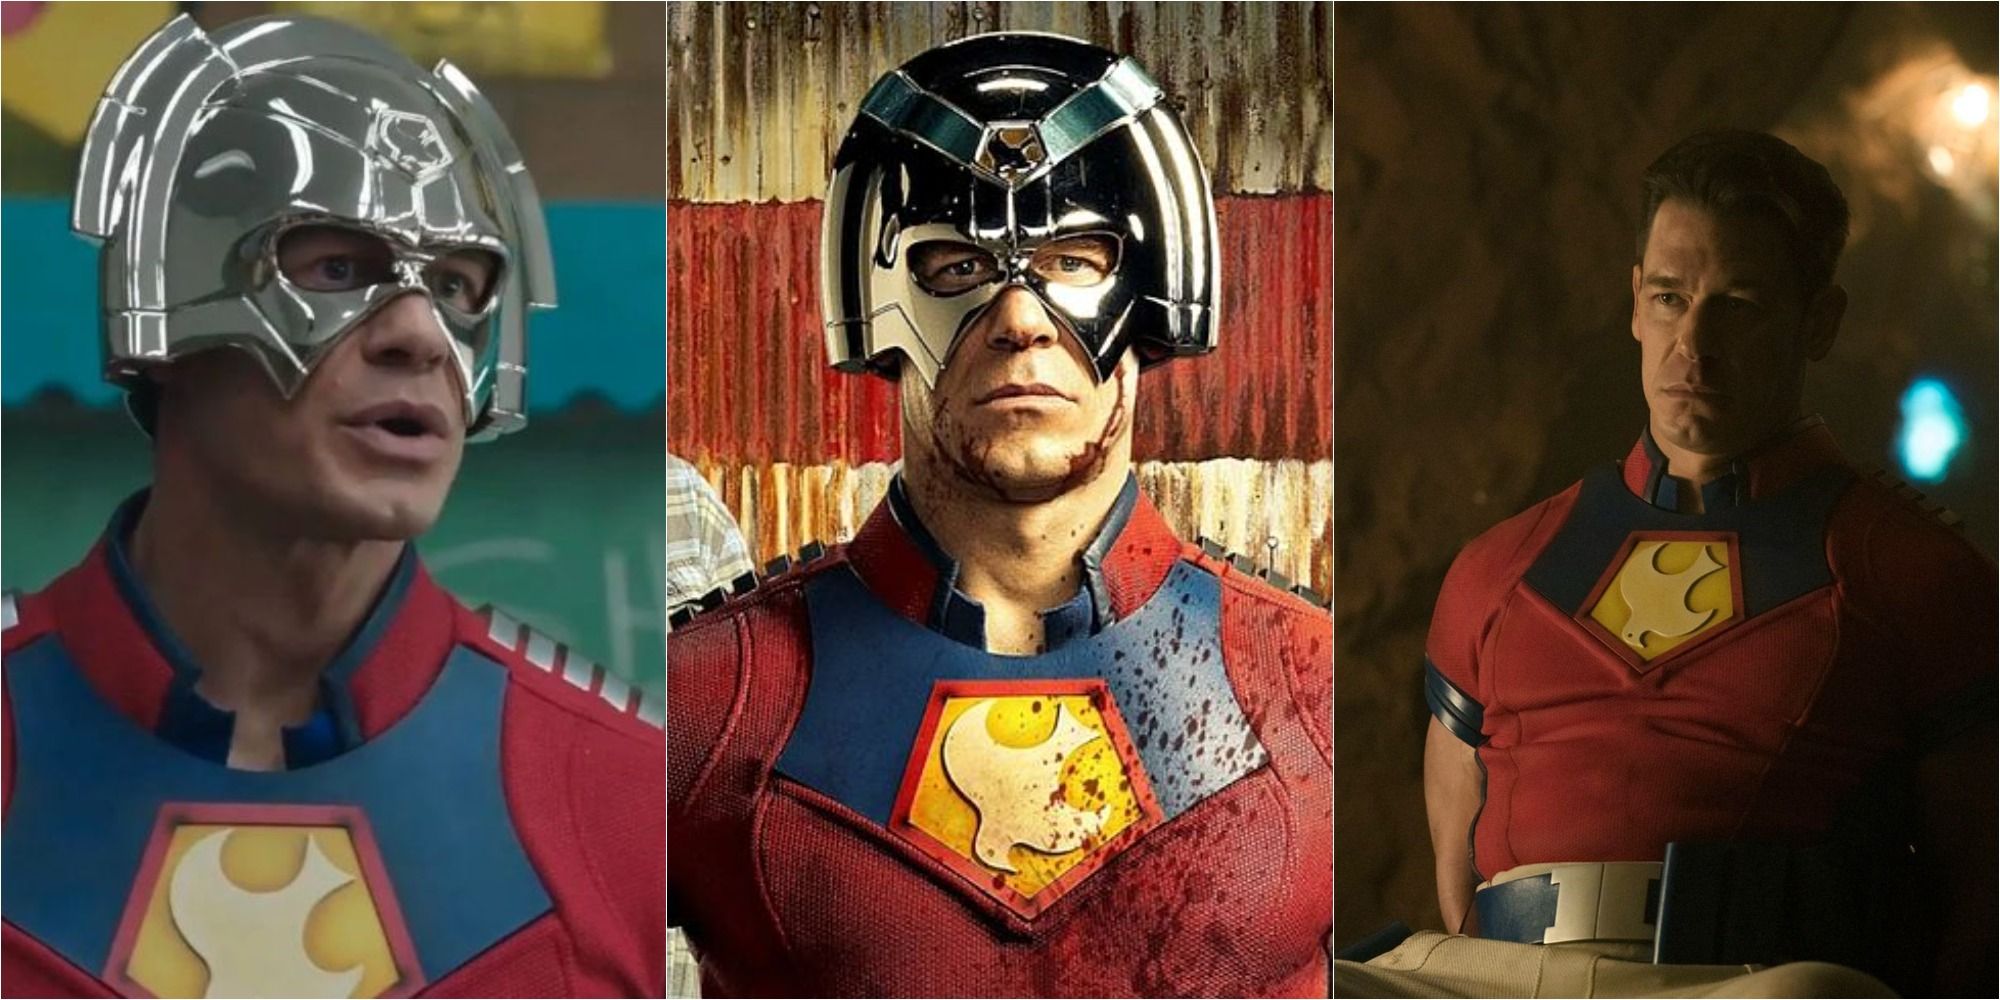 Three side by side images of John Cena as Peacemaker